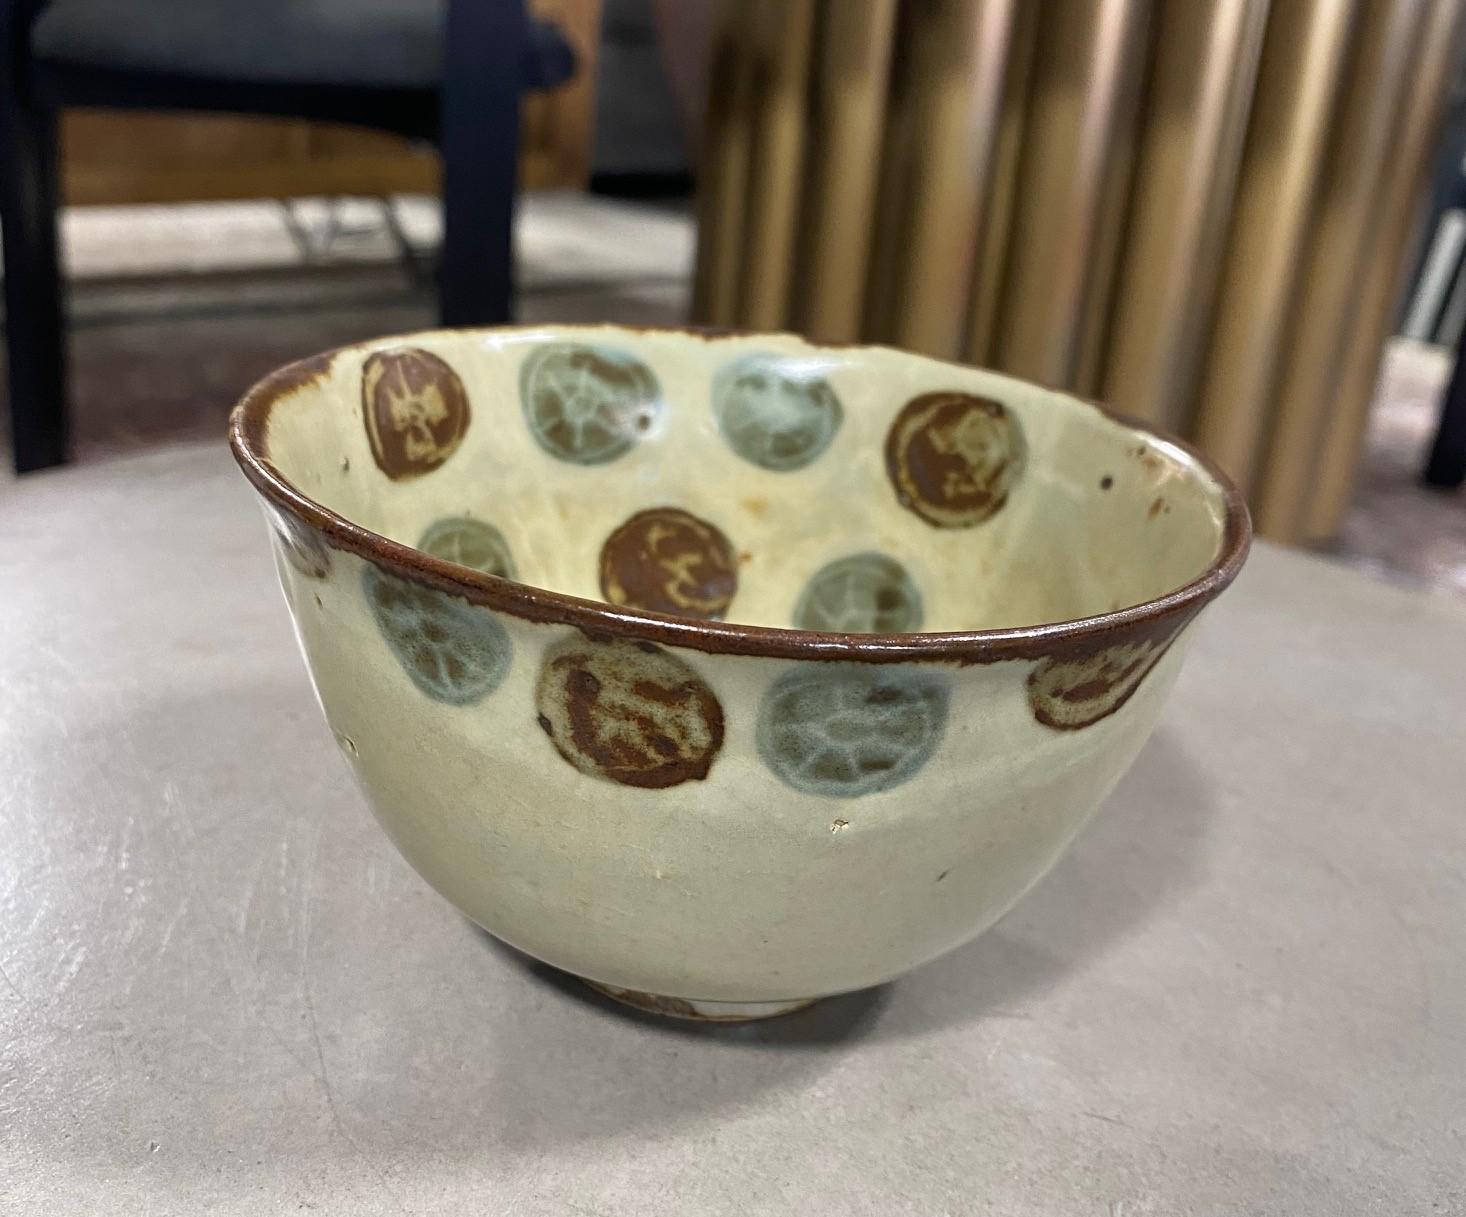 A spectacularly designed and beautifully made Chawan tea bowl dating back to the Edo period. This work is attributed to Ogata Kenzan who is widely considered to be Japan's most famous ceramic artist. 

Ogata Kenzan (also called Kenzan), whose